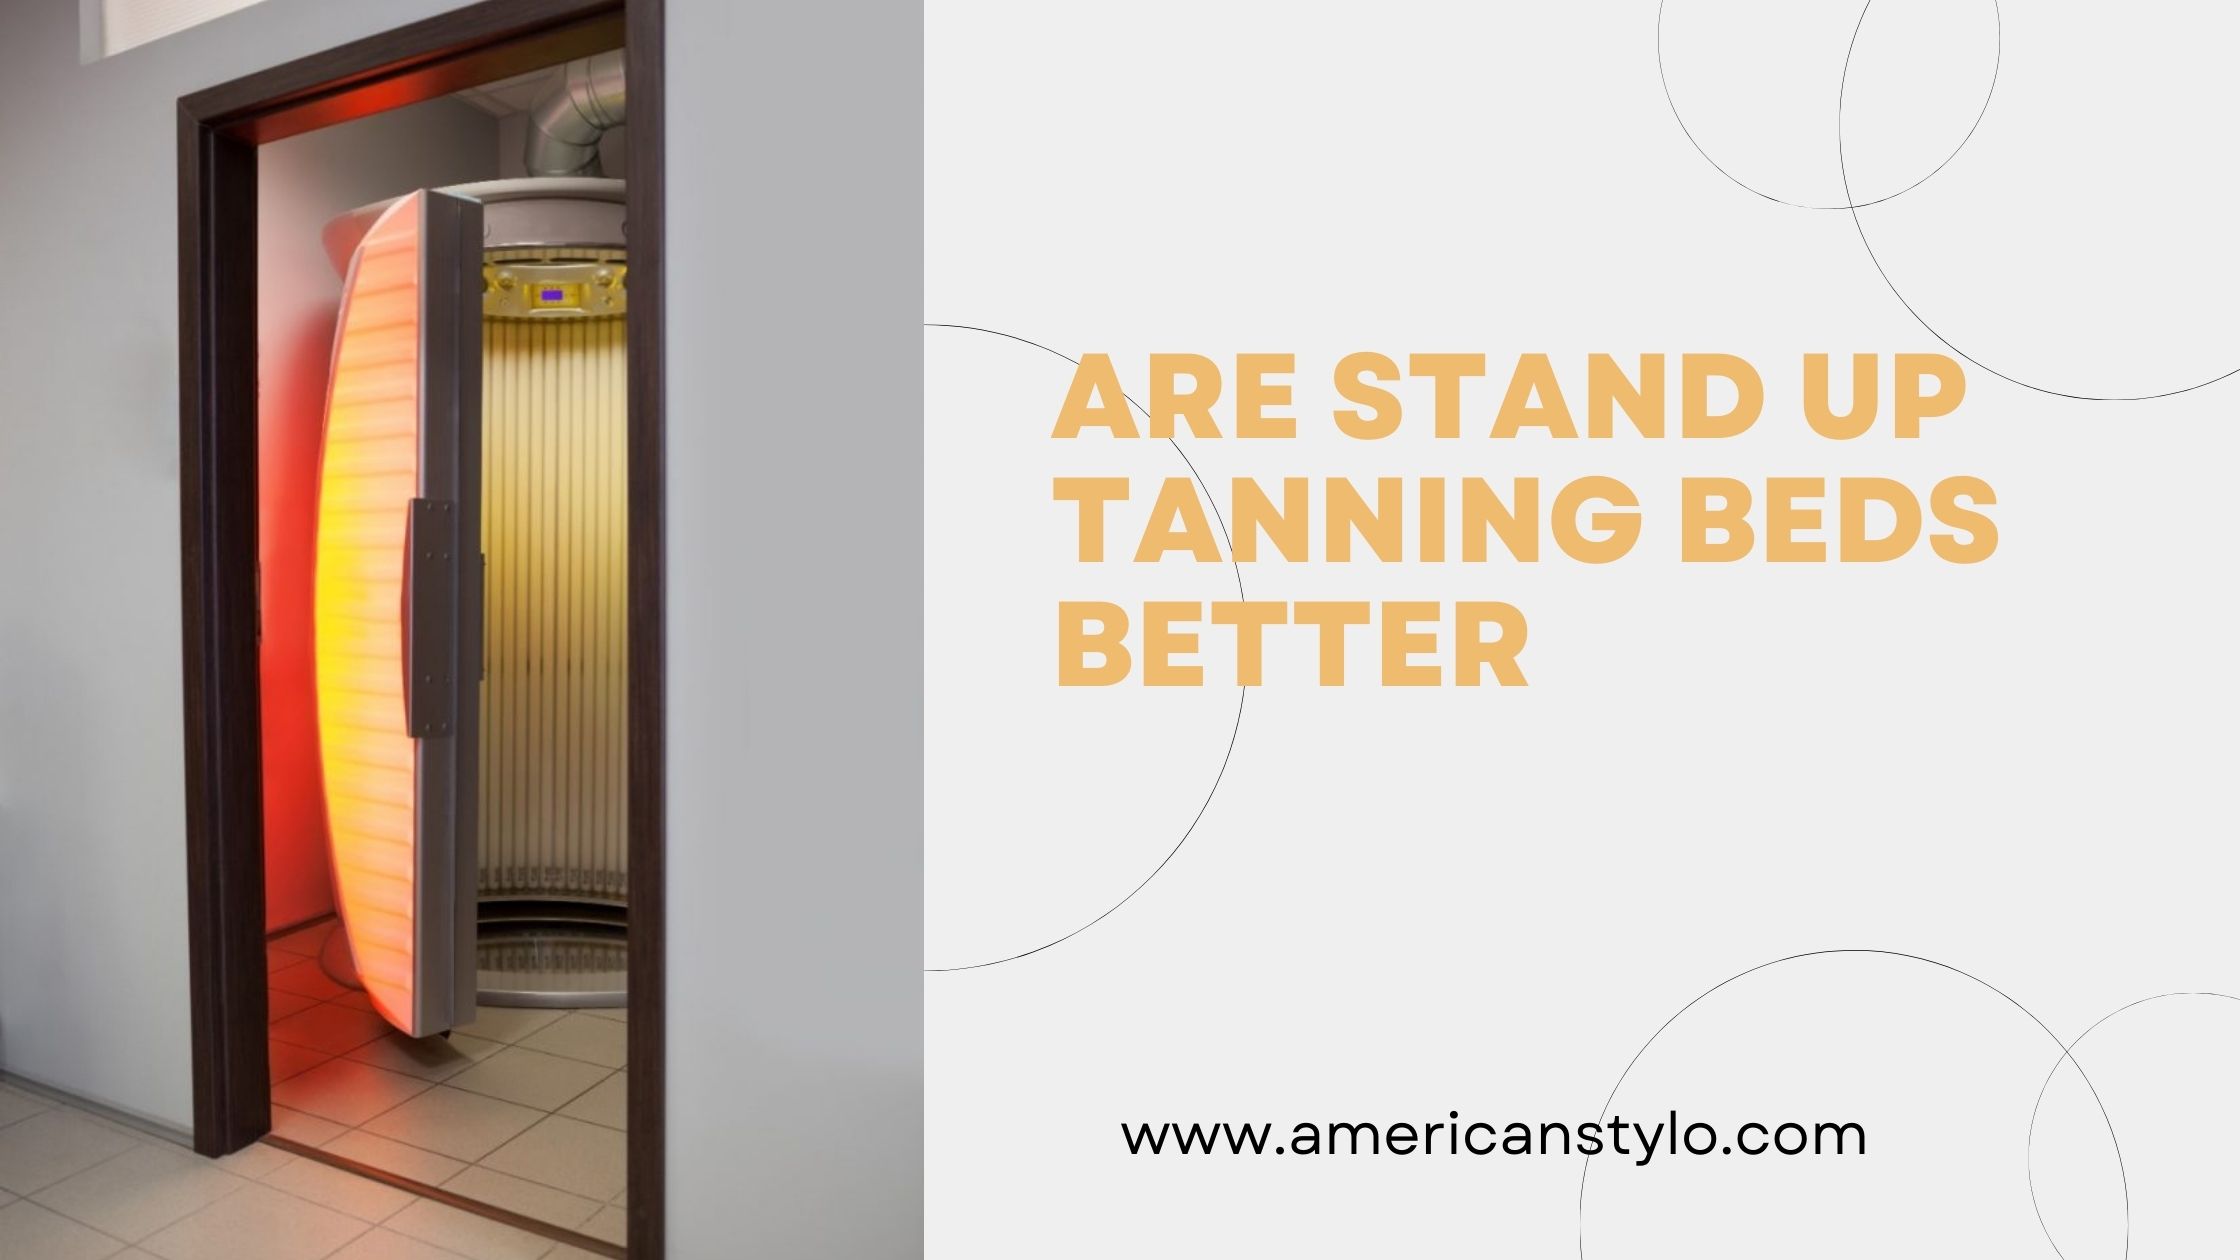 Are stand up tanning beds better